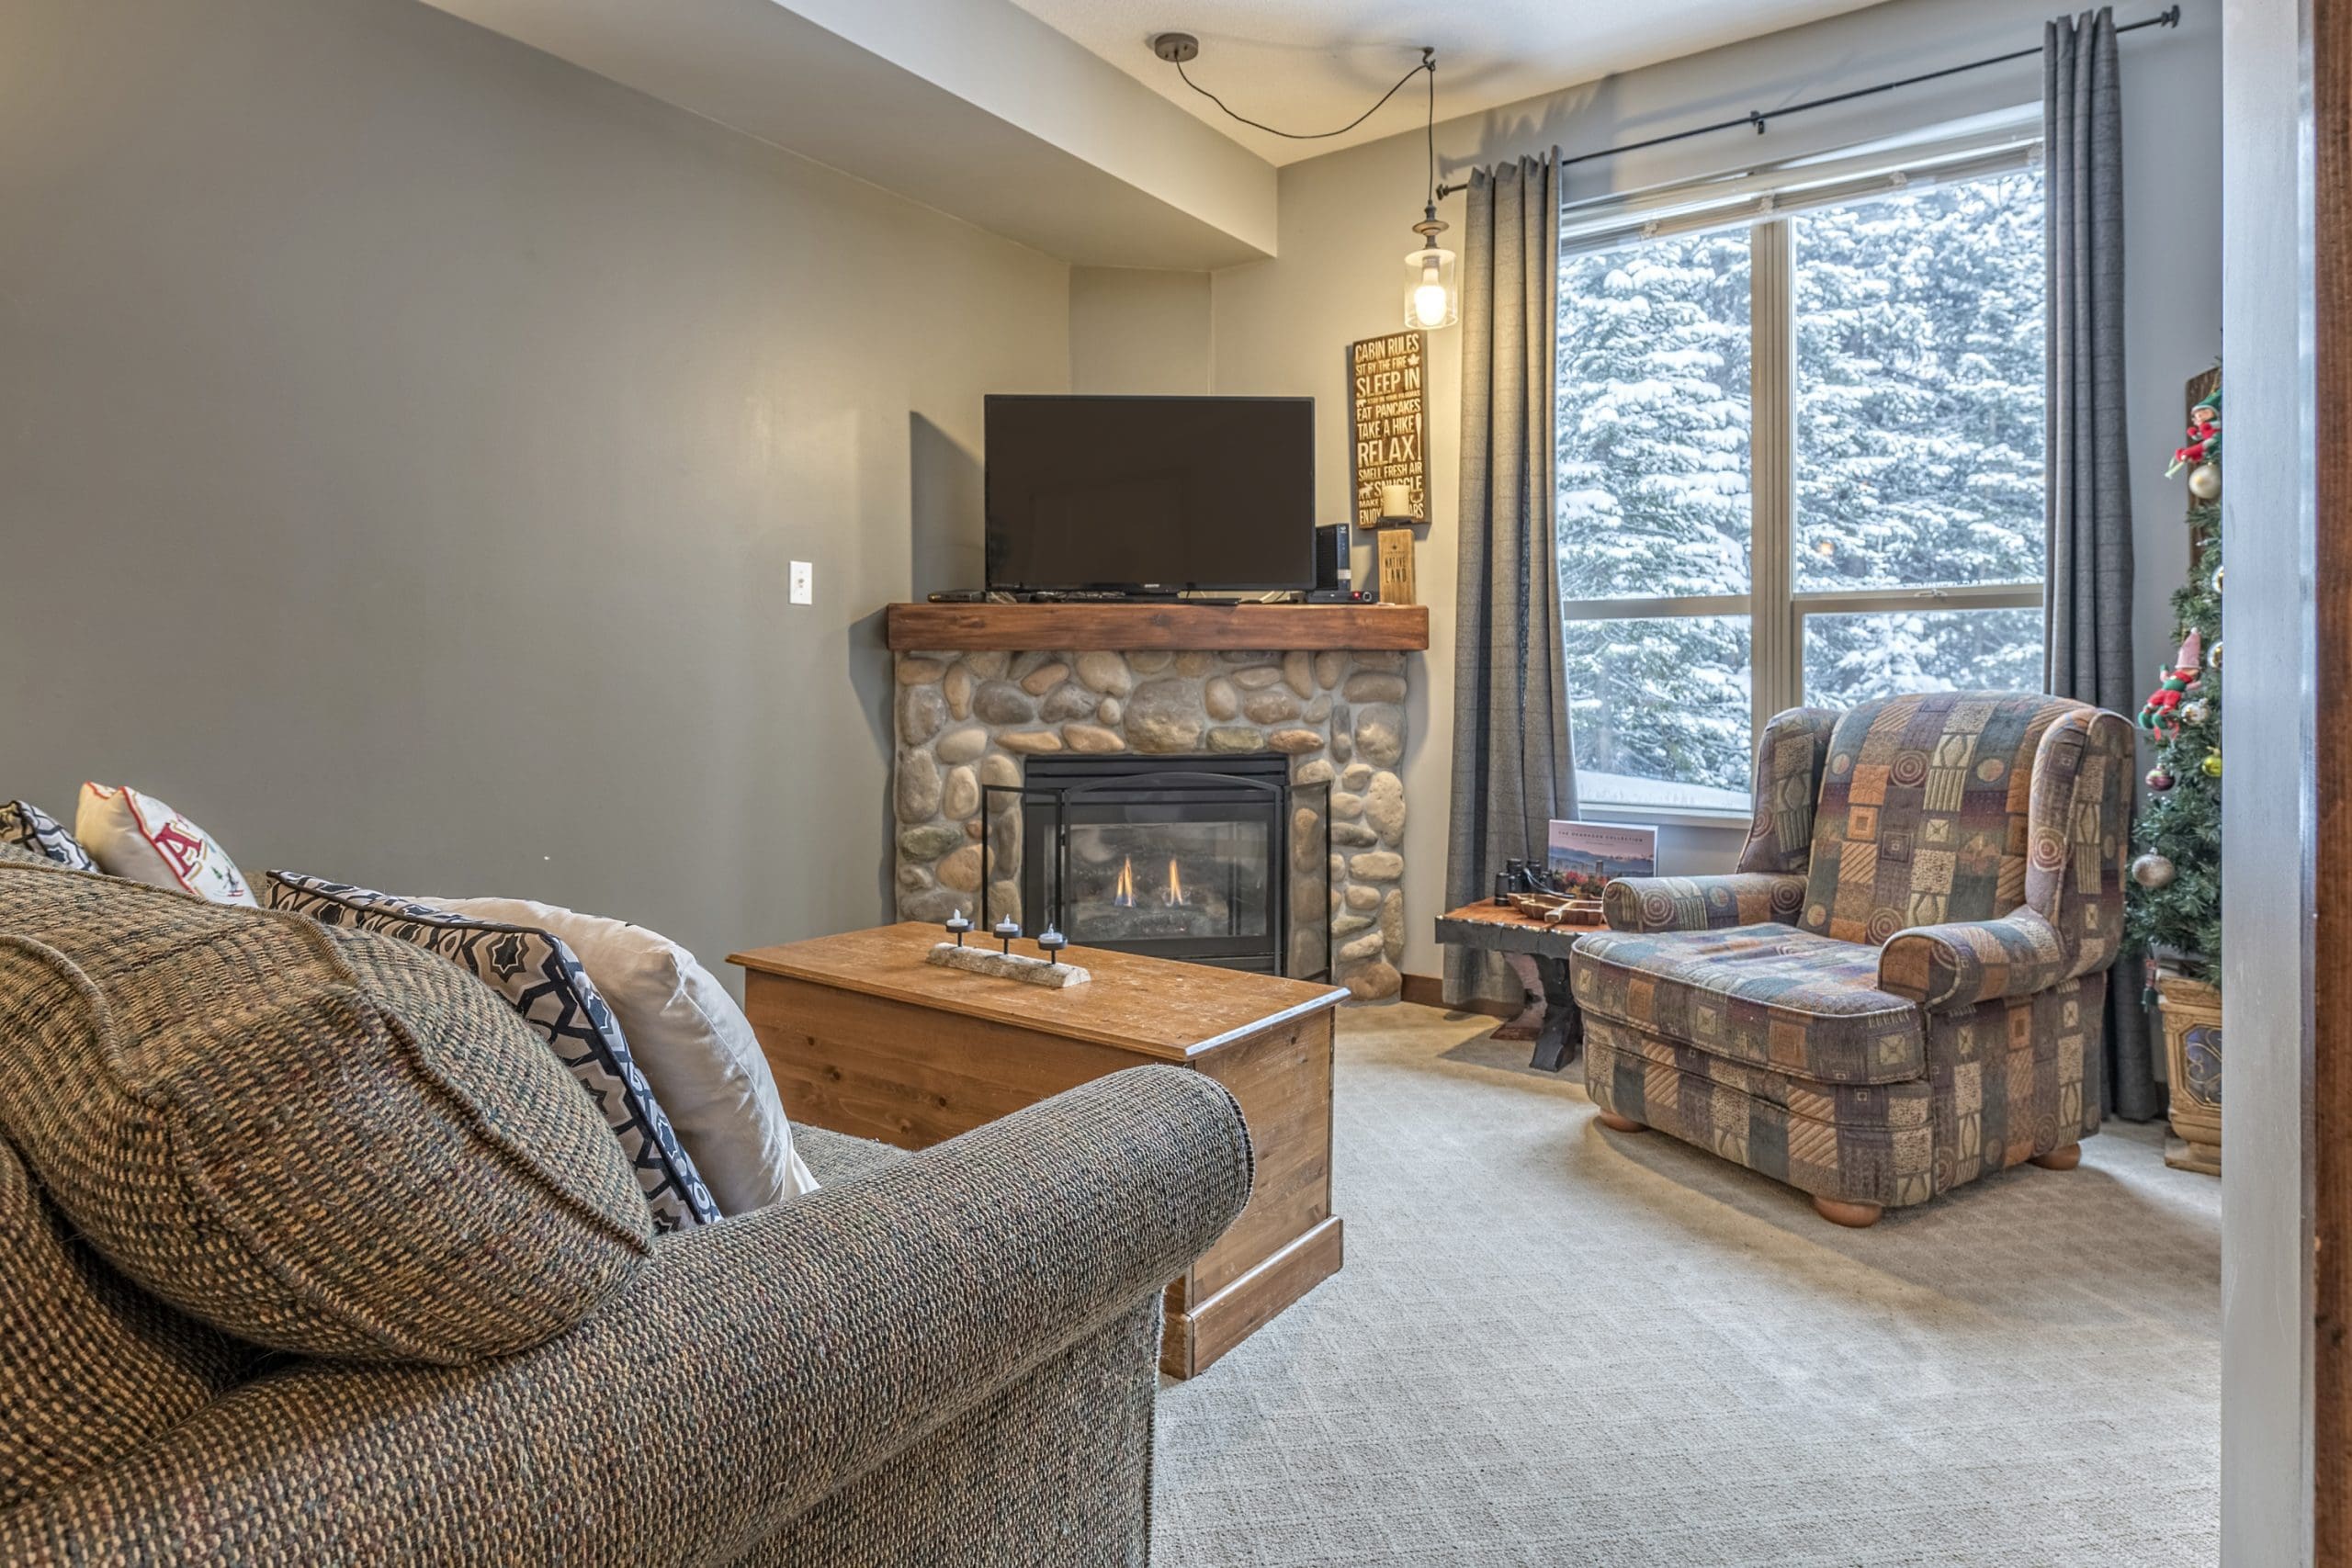 Cozy ground floor condo at Creekside. Ski right from your door to the Silver Queen Chair. Gas fireplace, TV and space for 7 guests.